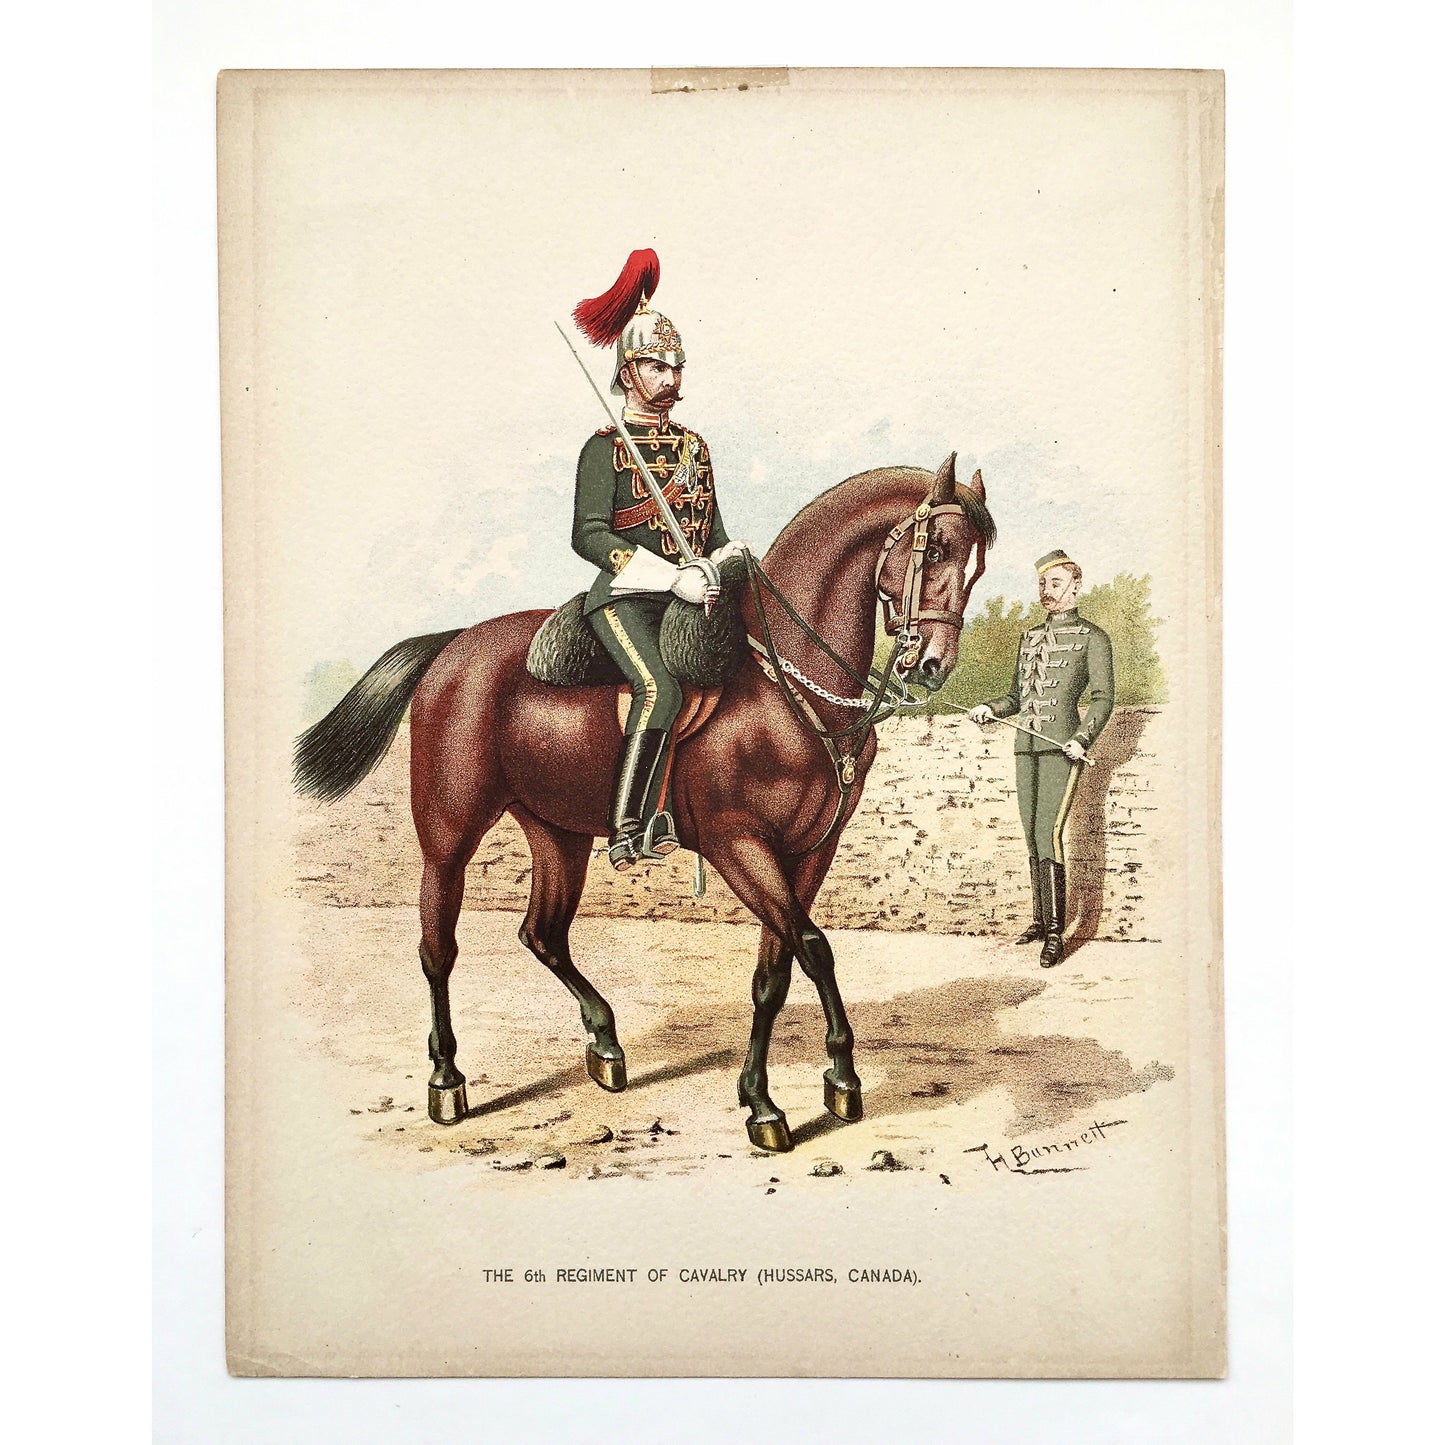 The 6th Regiment of Cavalry, Cavalry, 6th Regiment, Hussars, Canada, Artillery, Military, Military Costume, Horses, Riding, Costume, Uniform, Her Majesty's Army, Regiments, Queen's Forces, H. Bunnett, Bunnett, Sword, Army, London, 1890, Military Prints, Canadian, Canadian Military, Canadian Army, Armed Forces, Military Uniform, Chromolithograph, J. S. Virtue & Co., Antique Prints, Antique, Prints, Engravings, Home Decor, Gallery Wall, Inspo, Inspiration, Interior Decor, Military Decor, Military History, Art